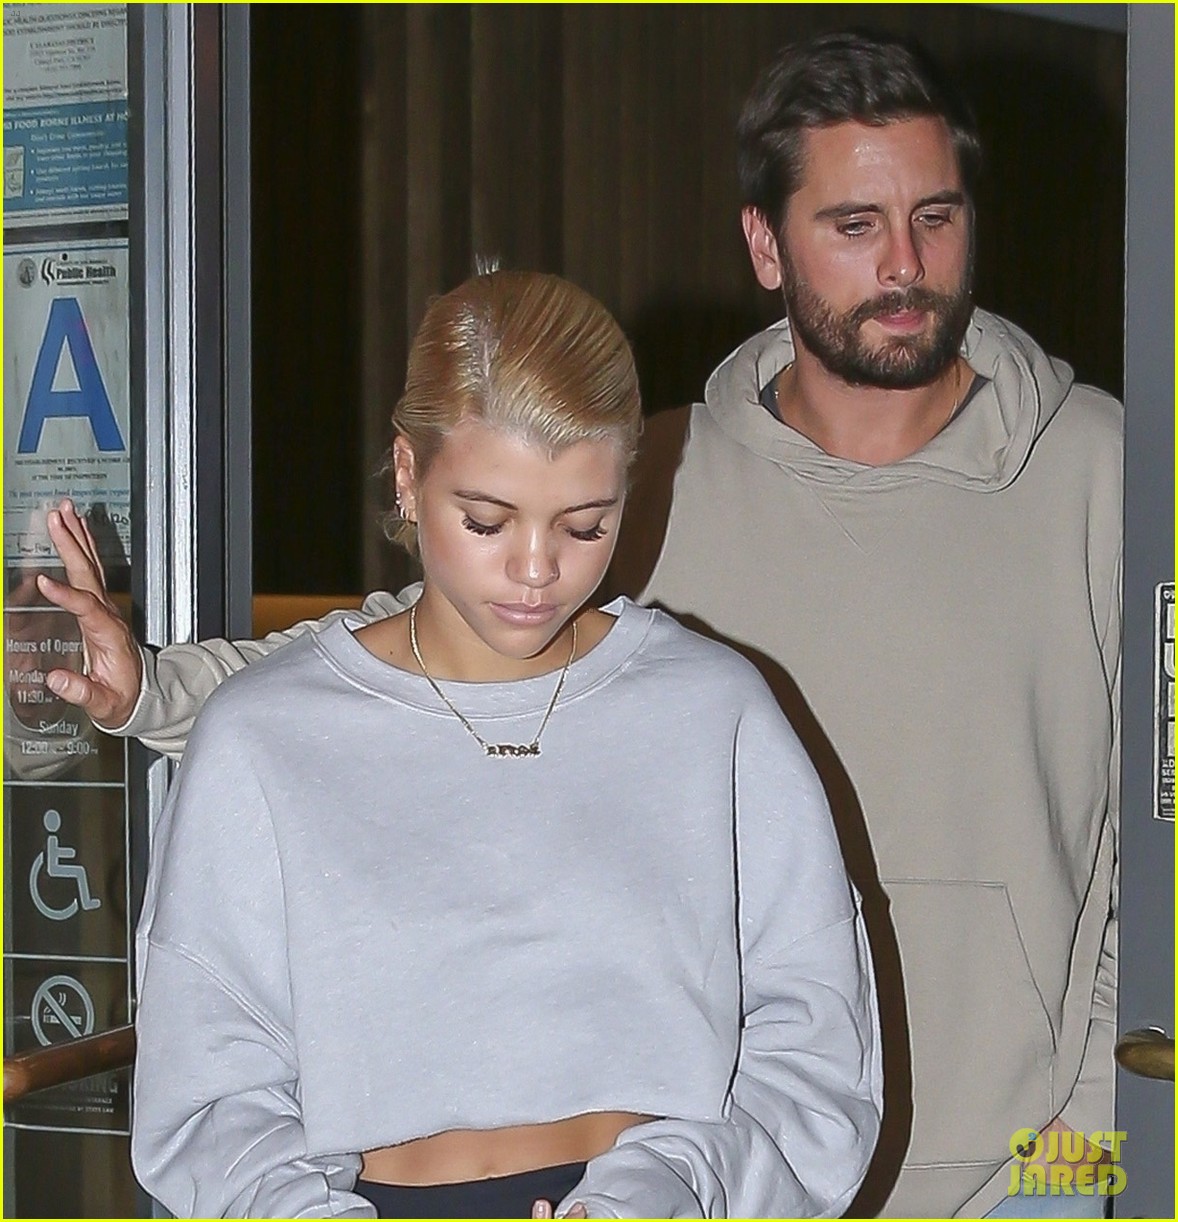 scott disick and sofia richie couple up for calabasas sushi date 01